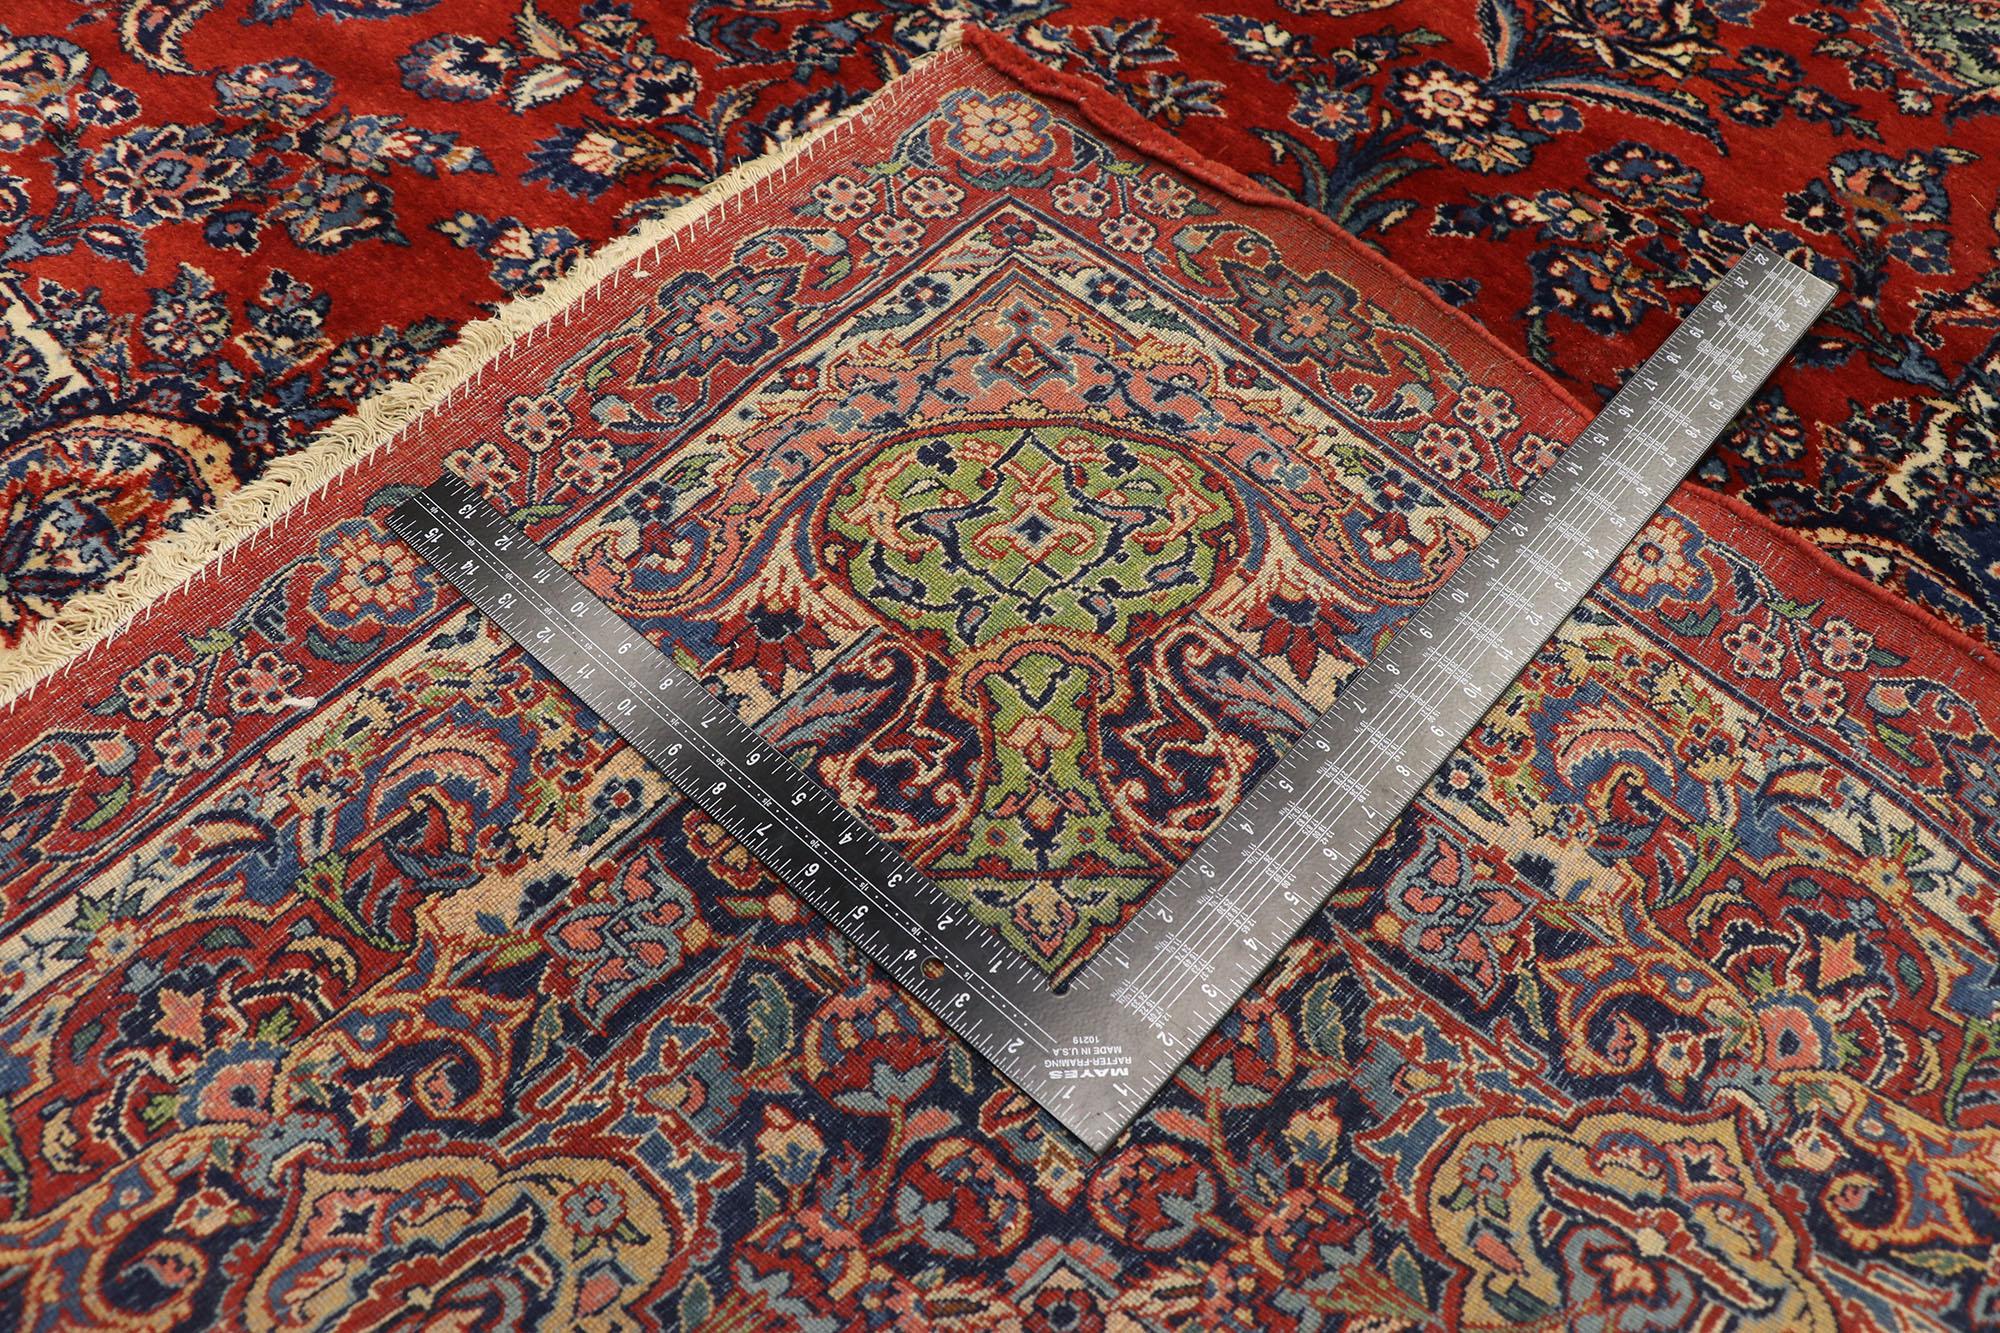 1890s Oversized Antique Persian Qazvin Rug, Hotel Lobby Size Carpet In Good Condition For Sale In Dallas, TX